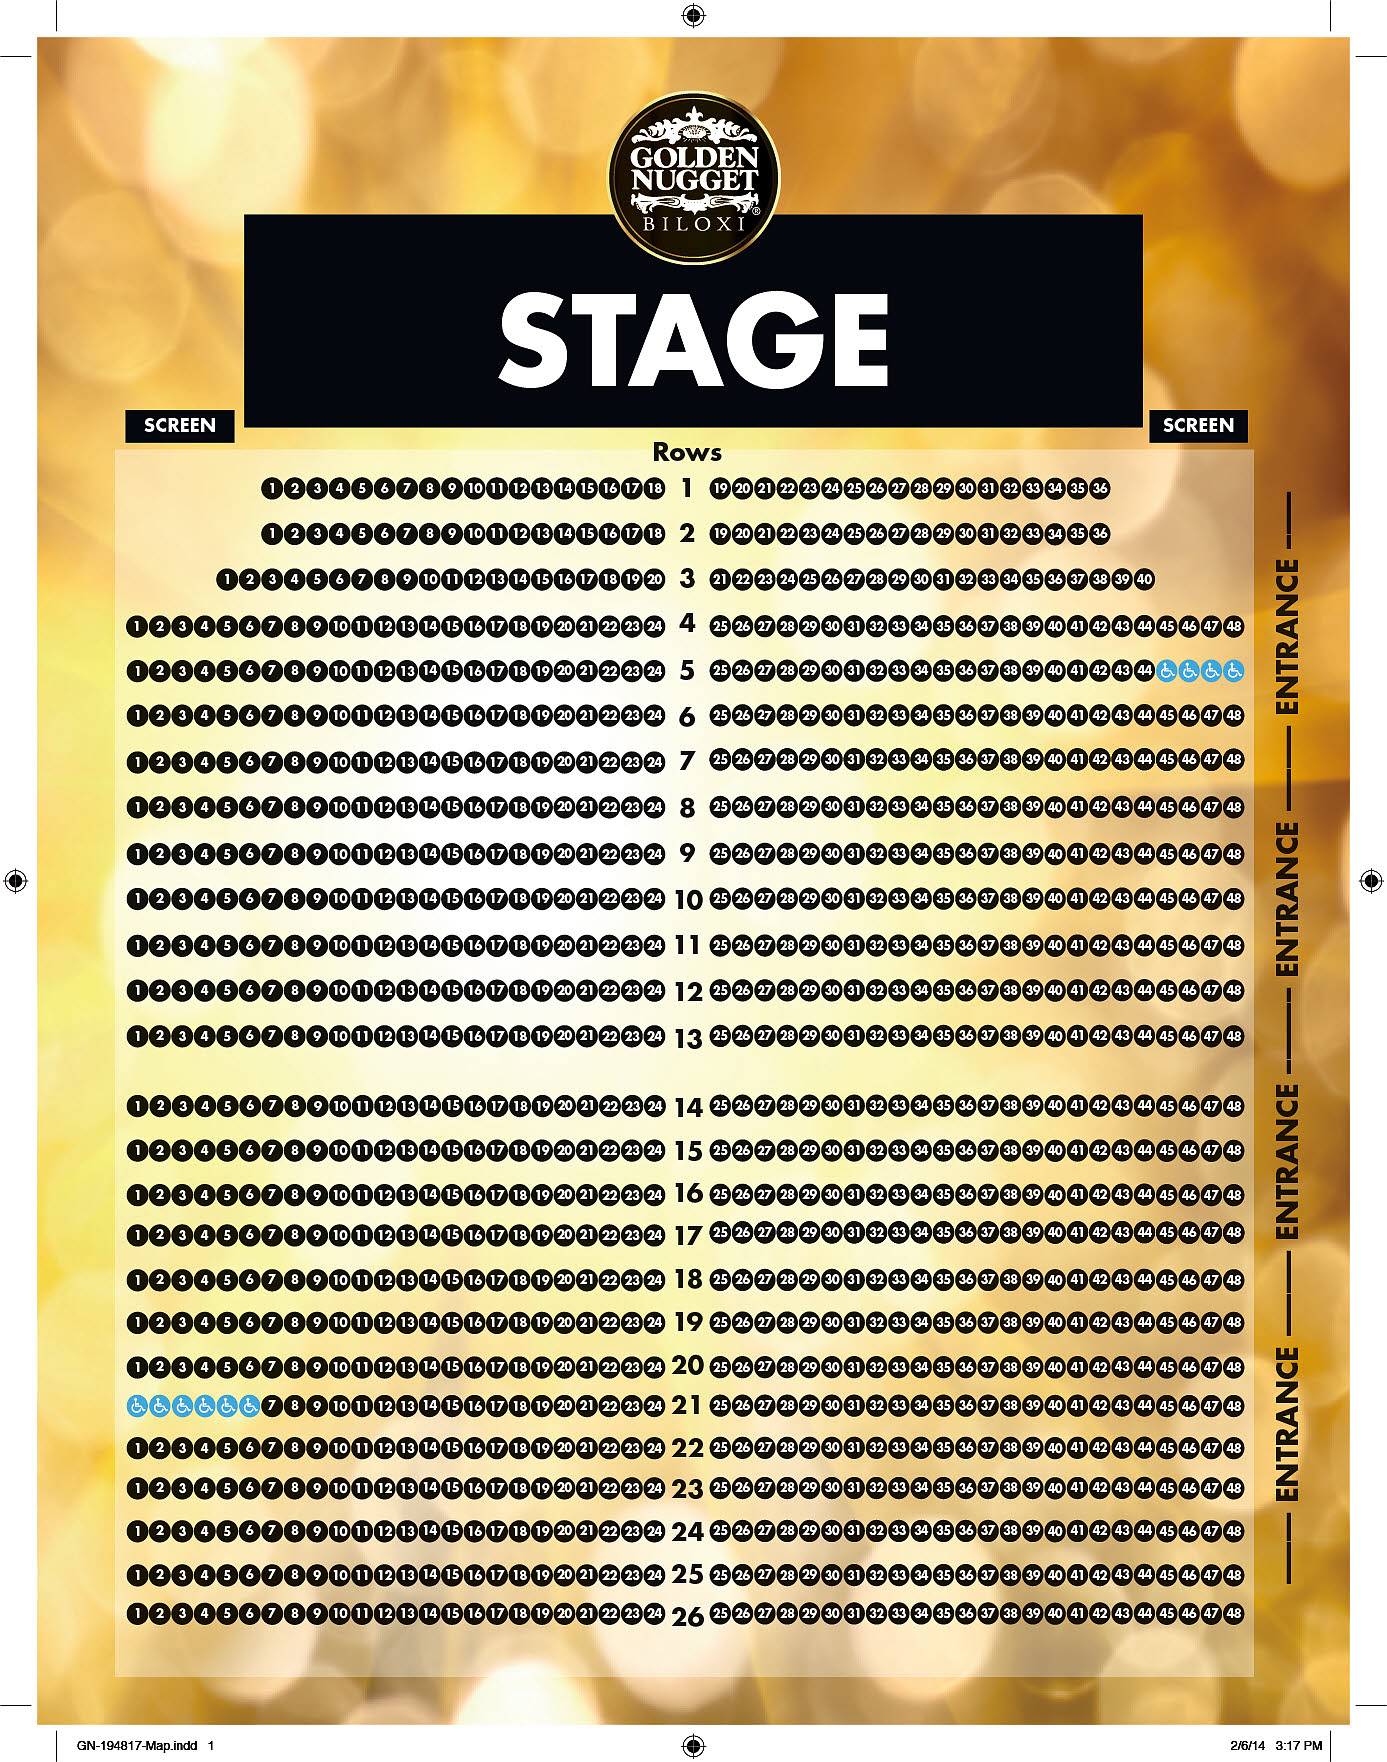 Nugget Event Center Seating Chart